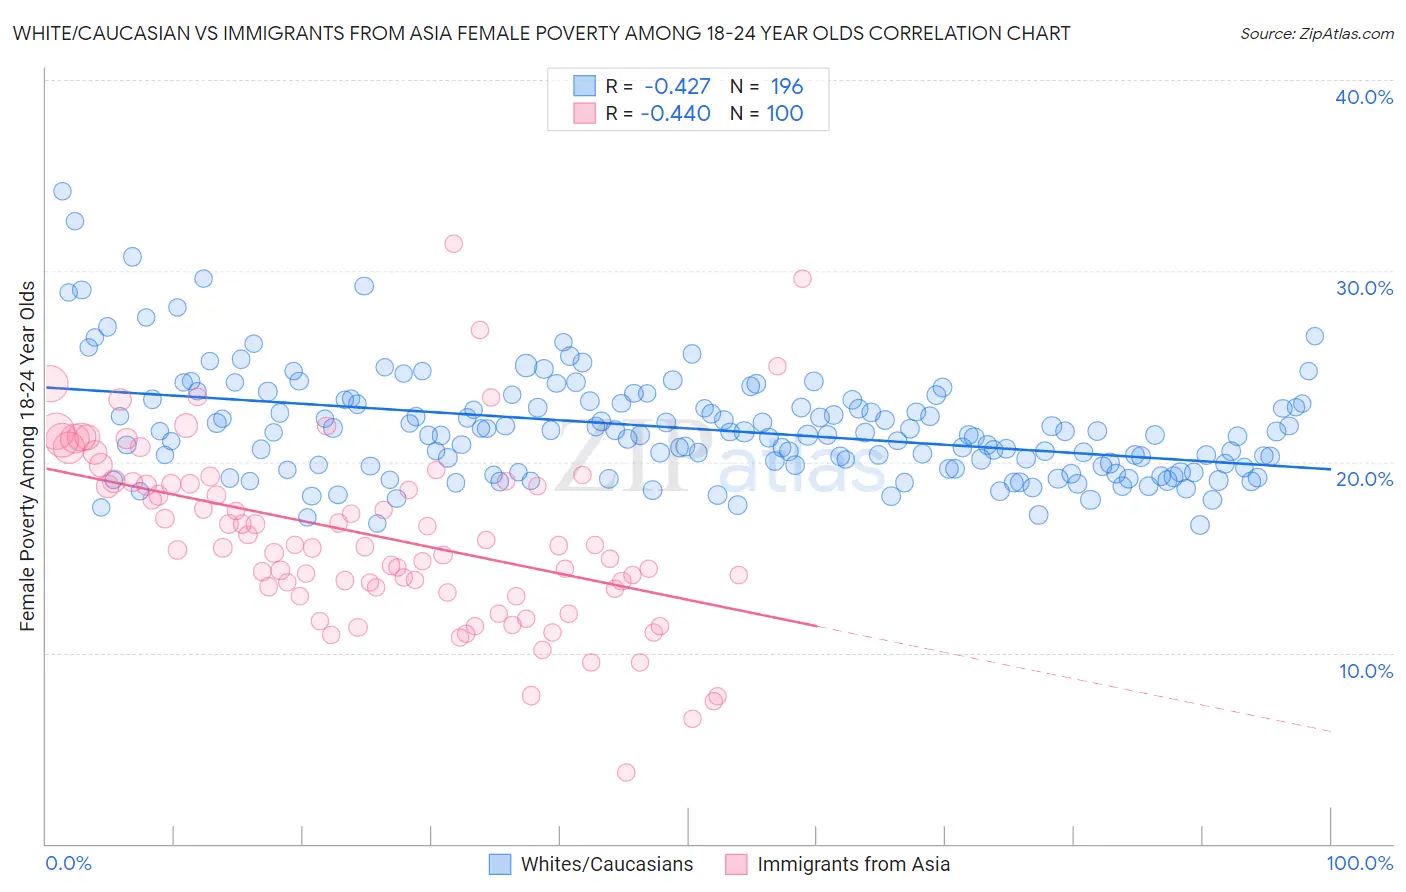 White/Caucasian vs Immigrants from Asia Female Poverty Among 18-24 Year Olds